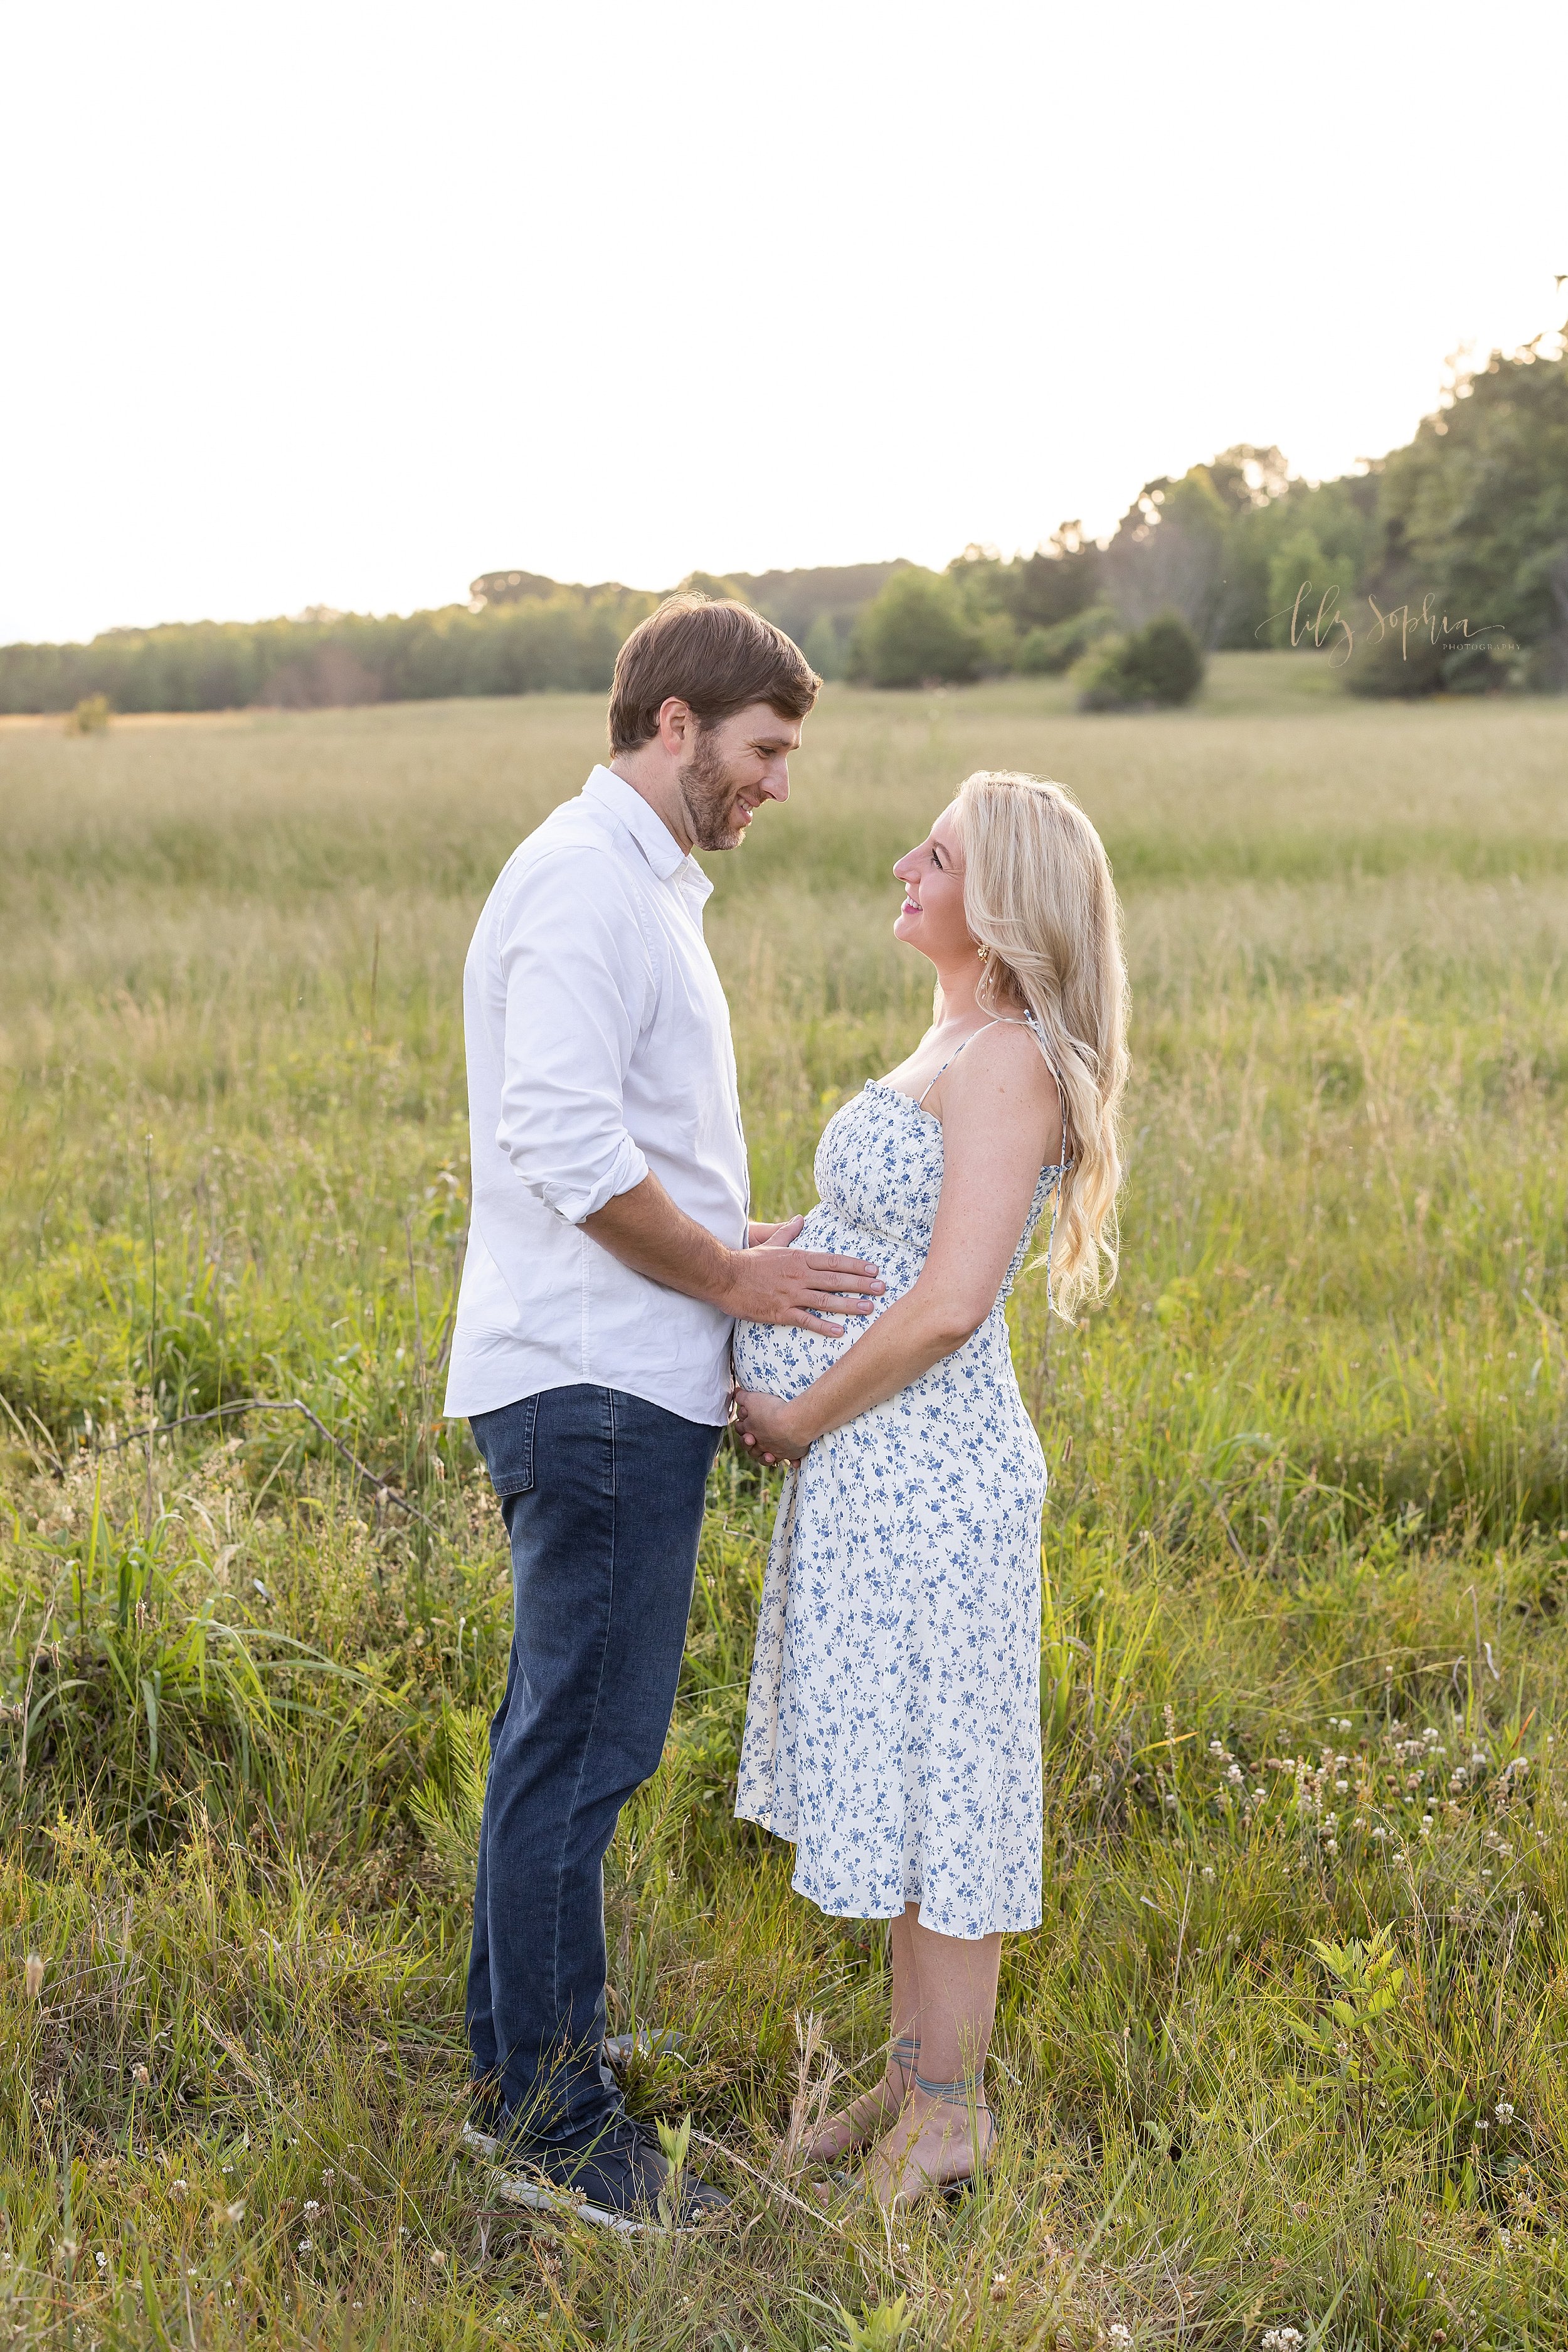  Maternity photoshoot taken in a field near Atlanta at sunset of a husband and wife as they face one another with mom holding the base of her belly and dad placing his hands on their child in utero 